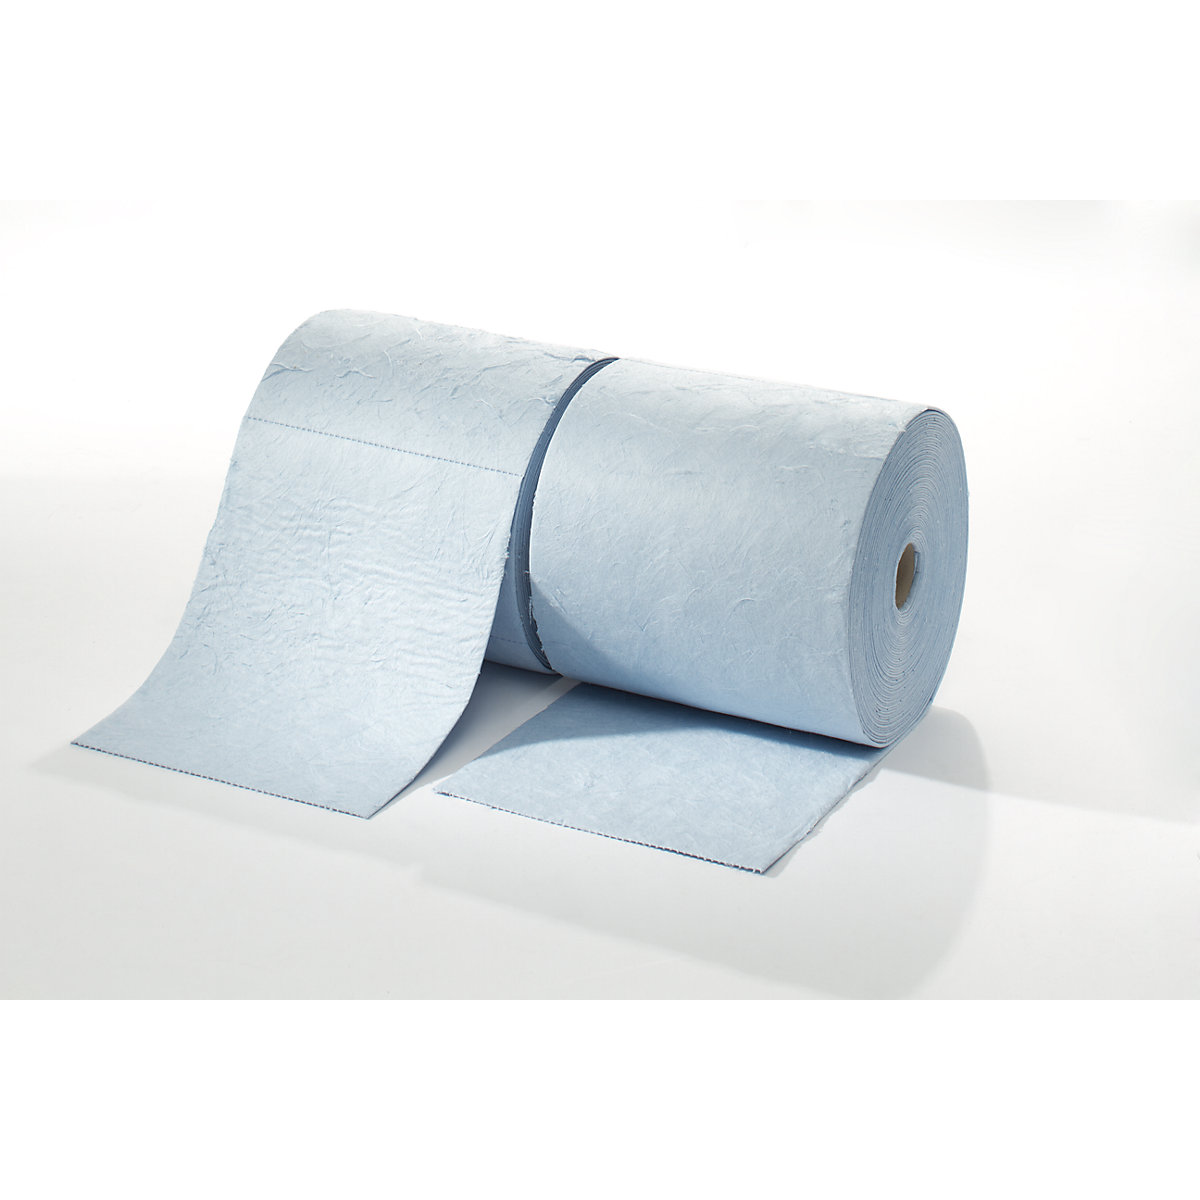 FIRST absorbent sheeting, roll of sheeting, heavy version, for oil, 400 mm x 40 m, blue, pack of 2 rolls-16